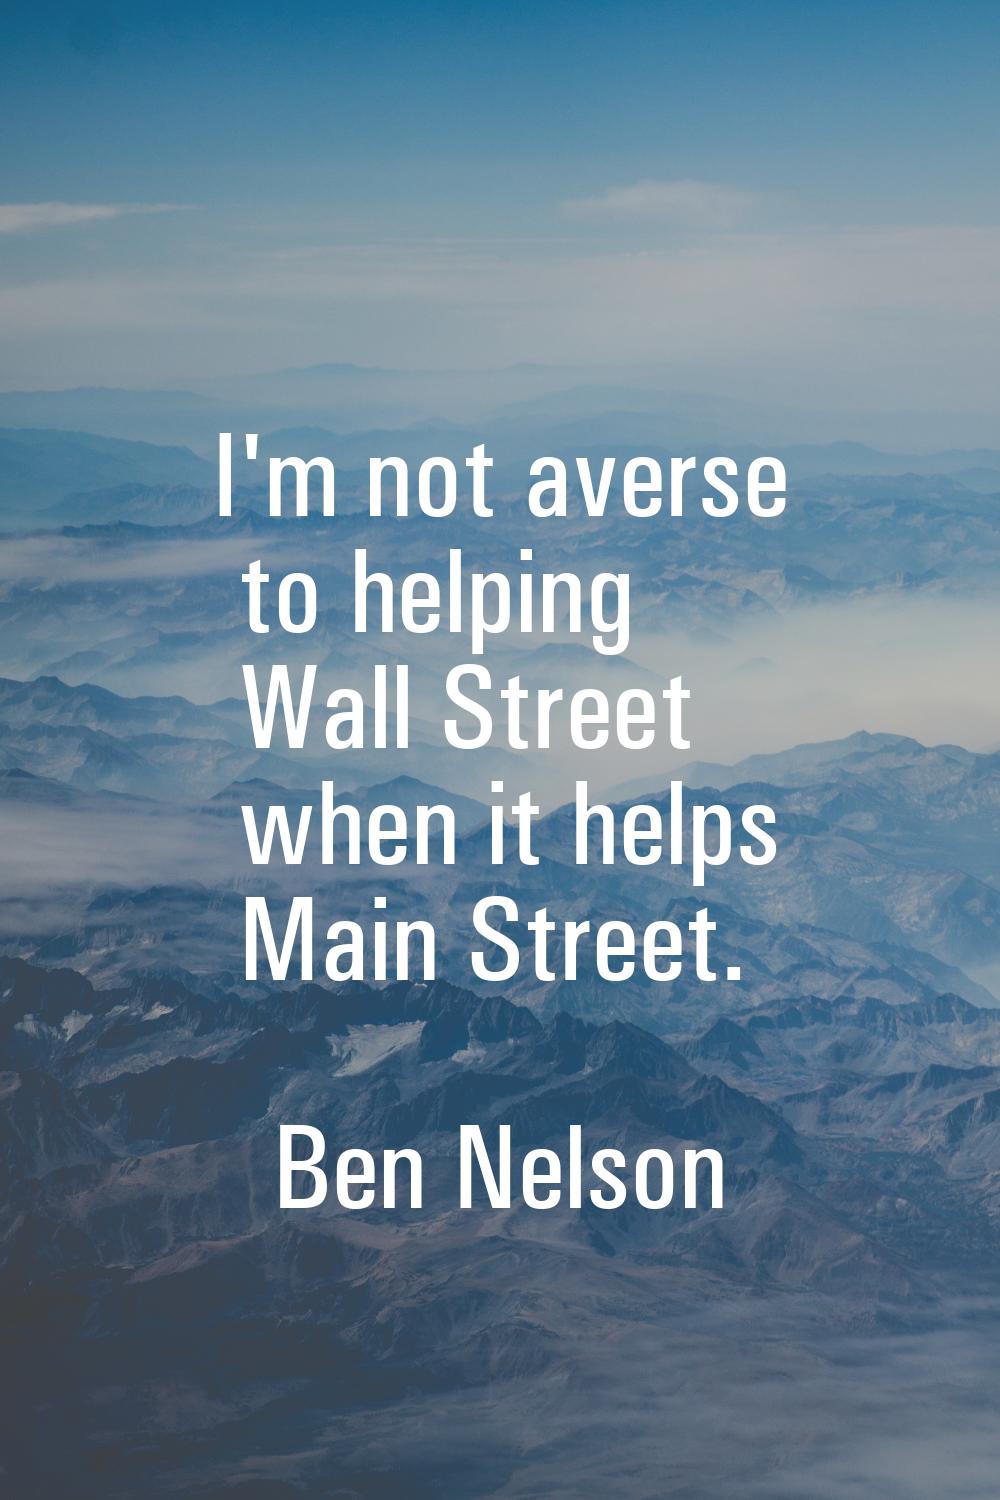 I'm not averse to helping Wall Street when it helps Main Street.